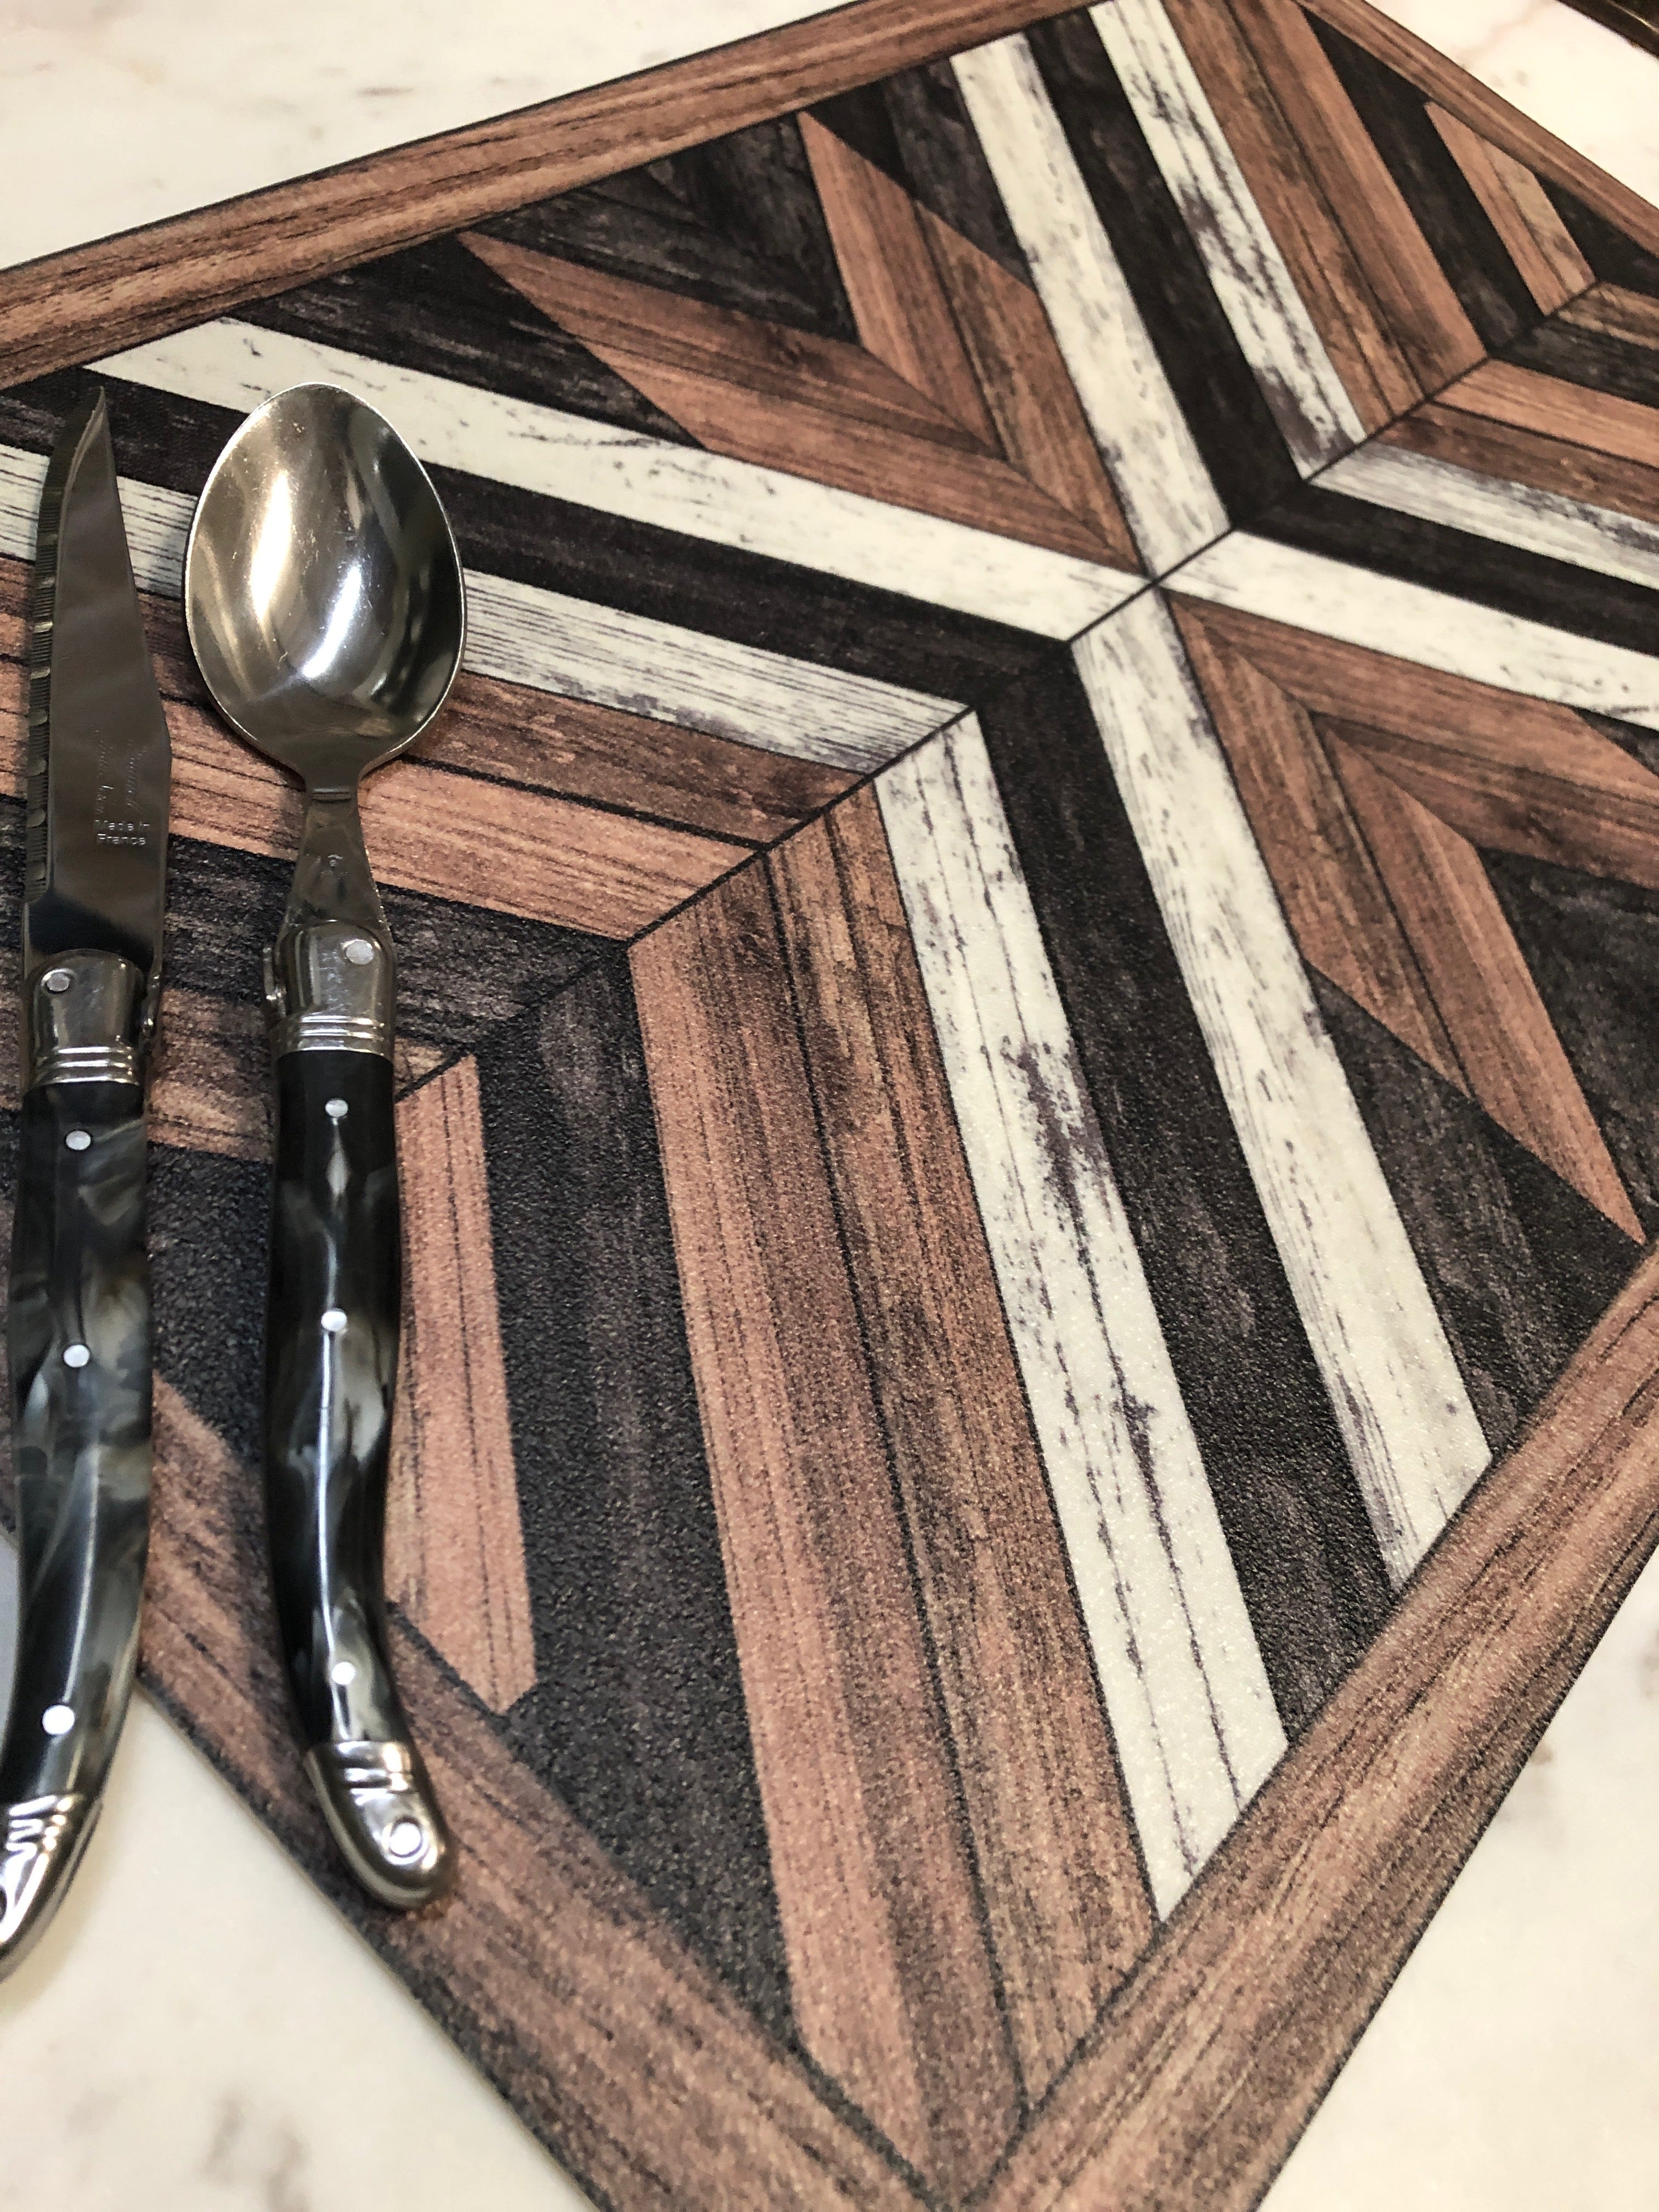 Beija Flor Wood Art Placemat Black & Brown (13" x 20") (Buy 2 Get 1 Free!) Placemats Beija Flor Brand_Beija Flor CLEAN OUT SALE Home_Decor Home_Placemats LMF23 IMG_5615